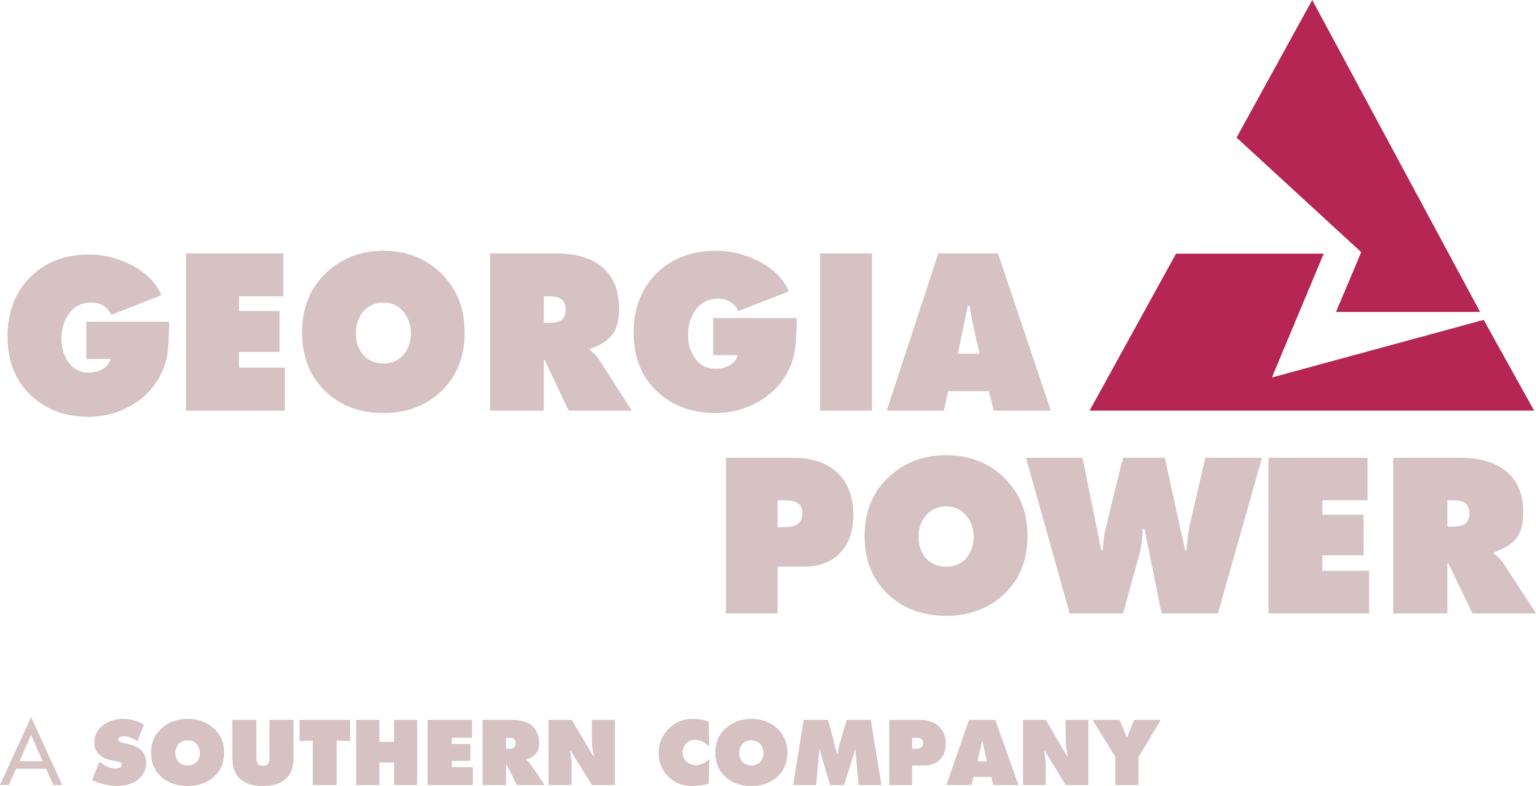 with-846-mw-of-renewables-online-georgia-power-plans-to-add-1-6-gw-by-2021